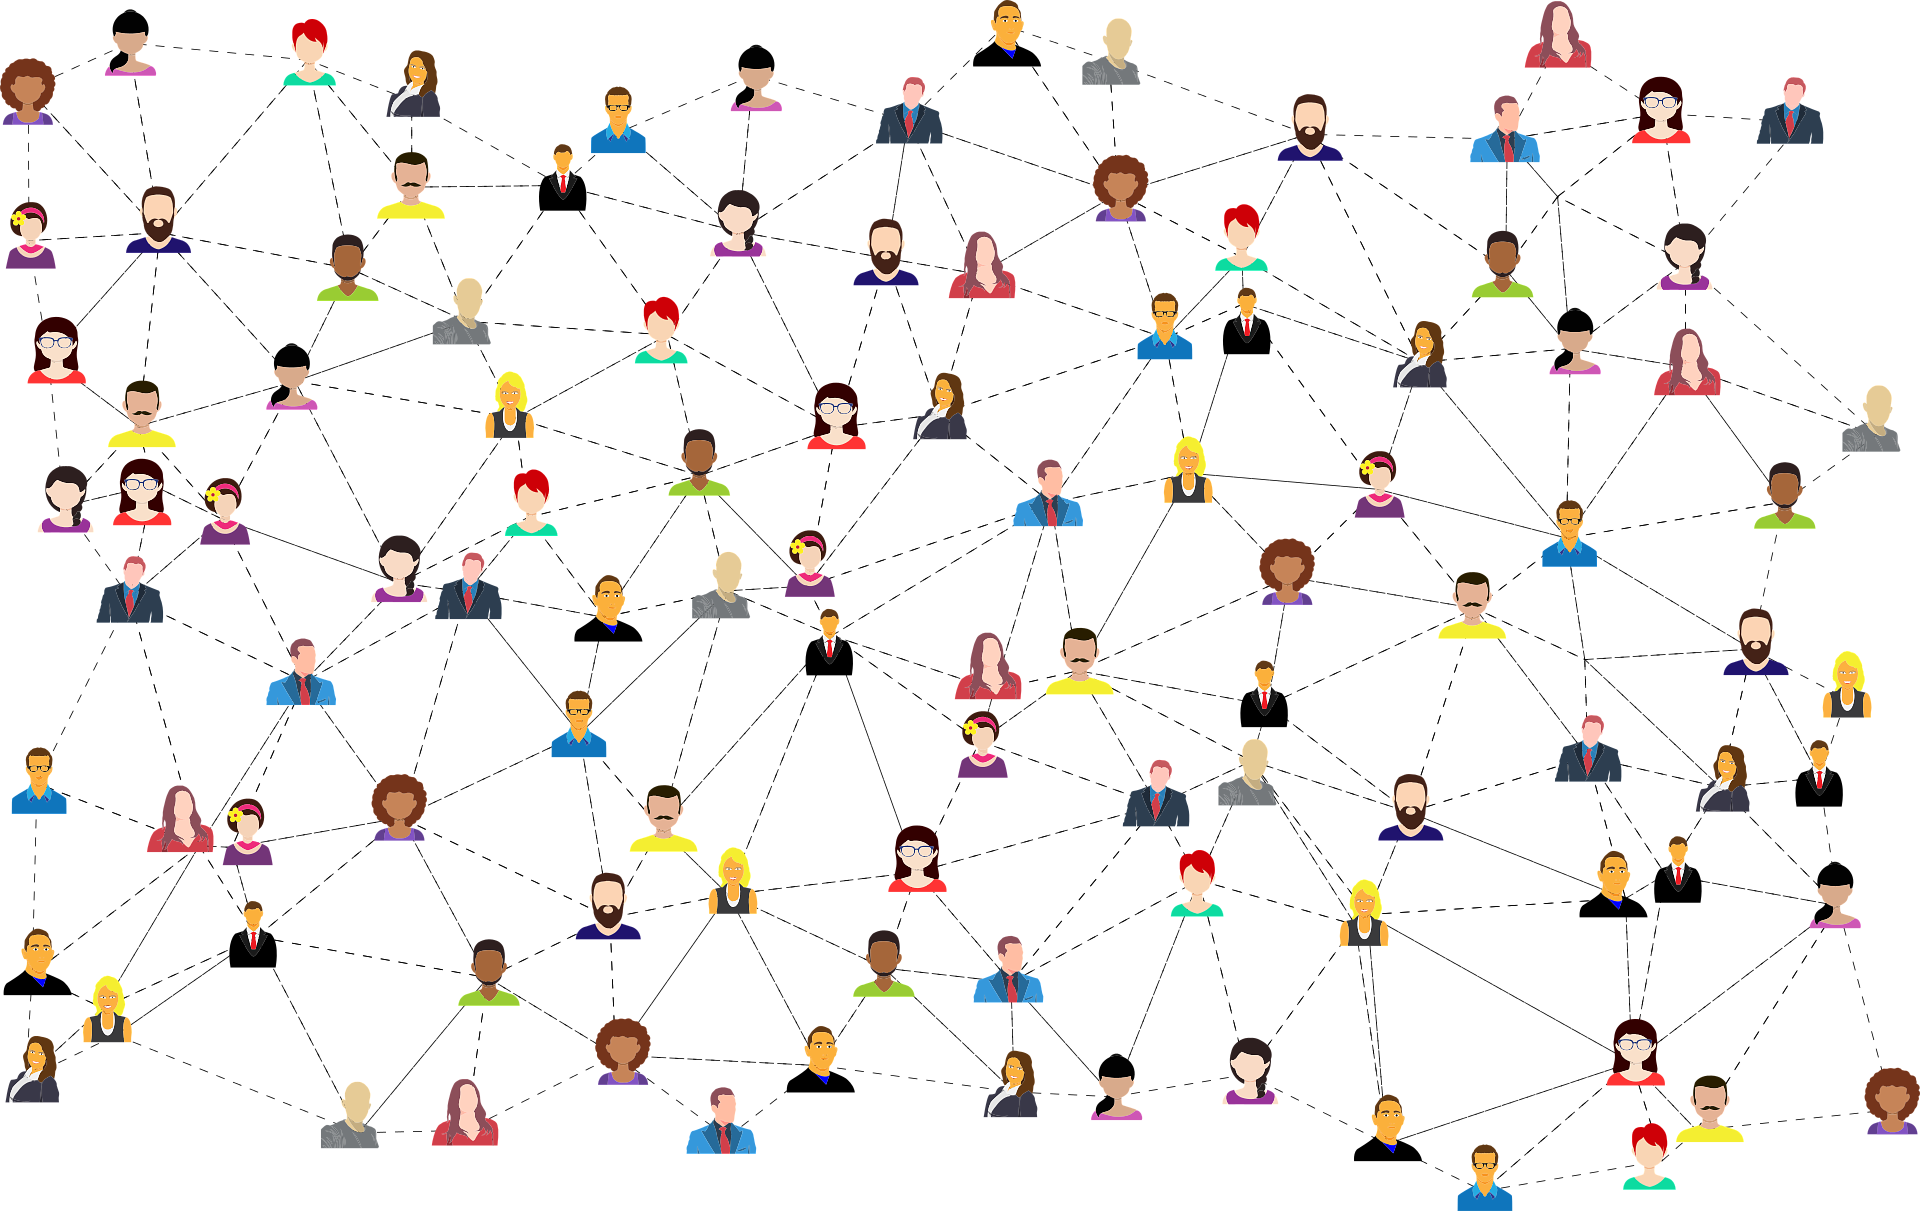 An illustration showing a network of people linked together